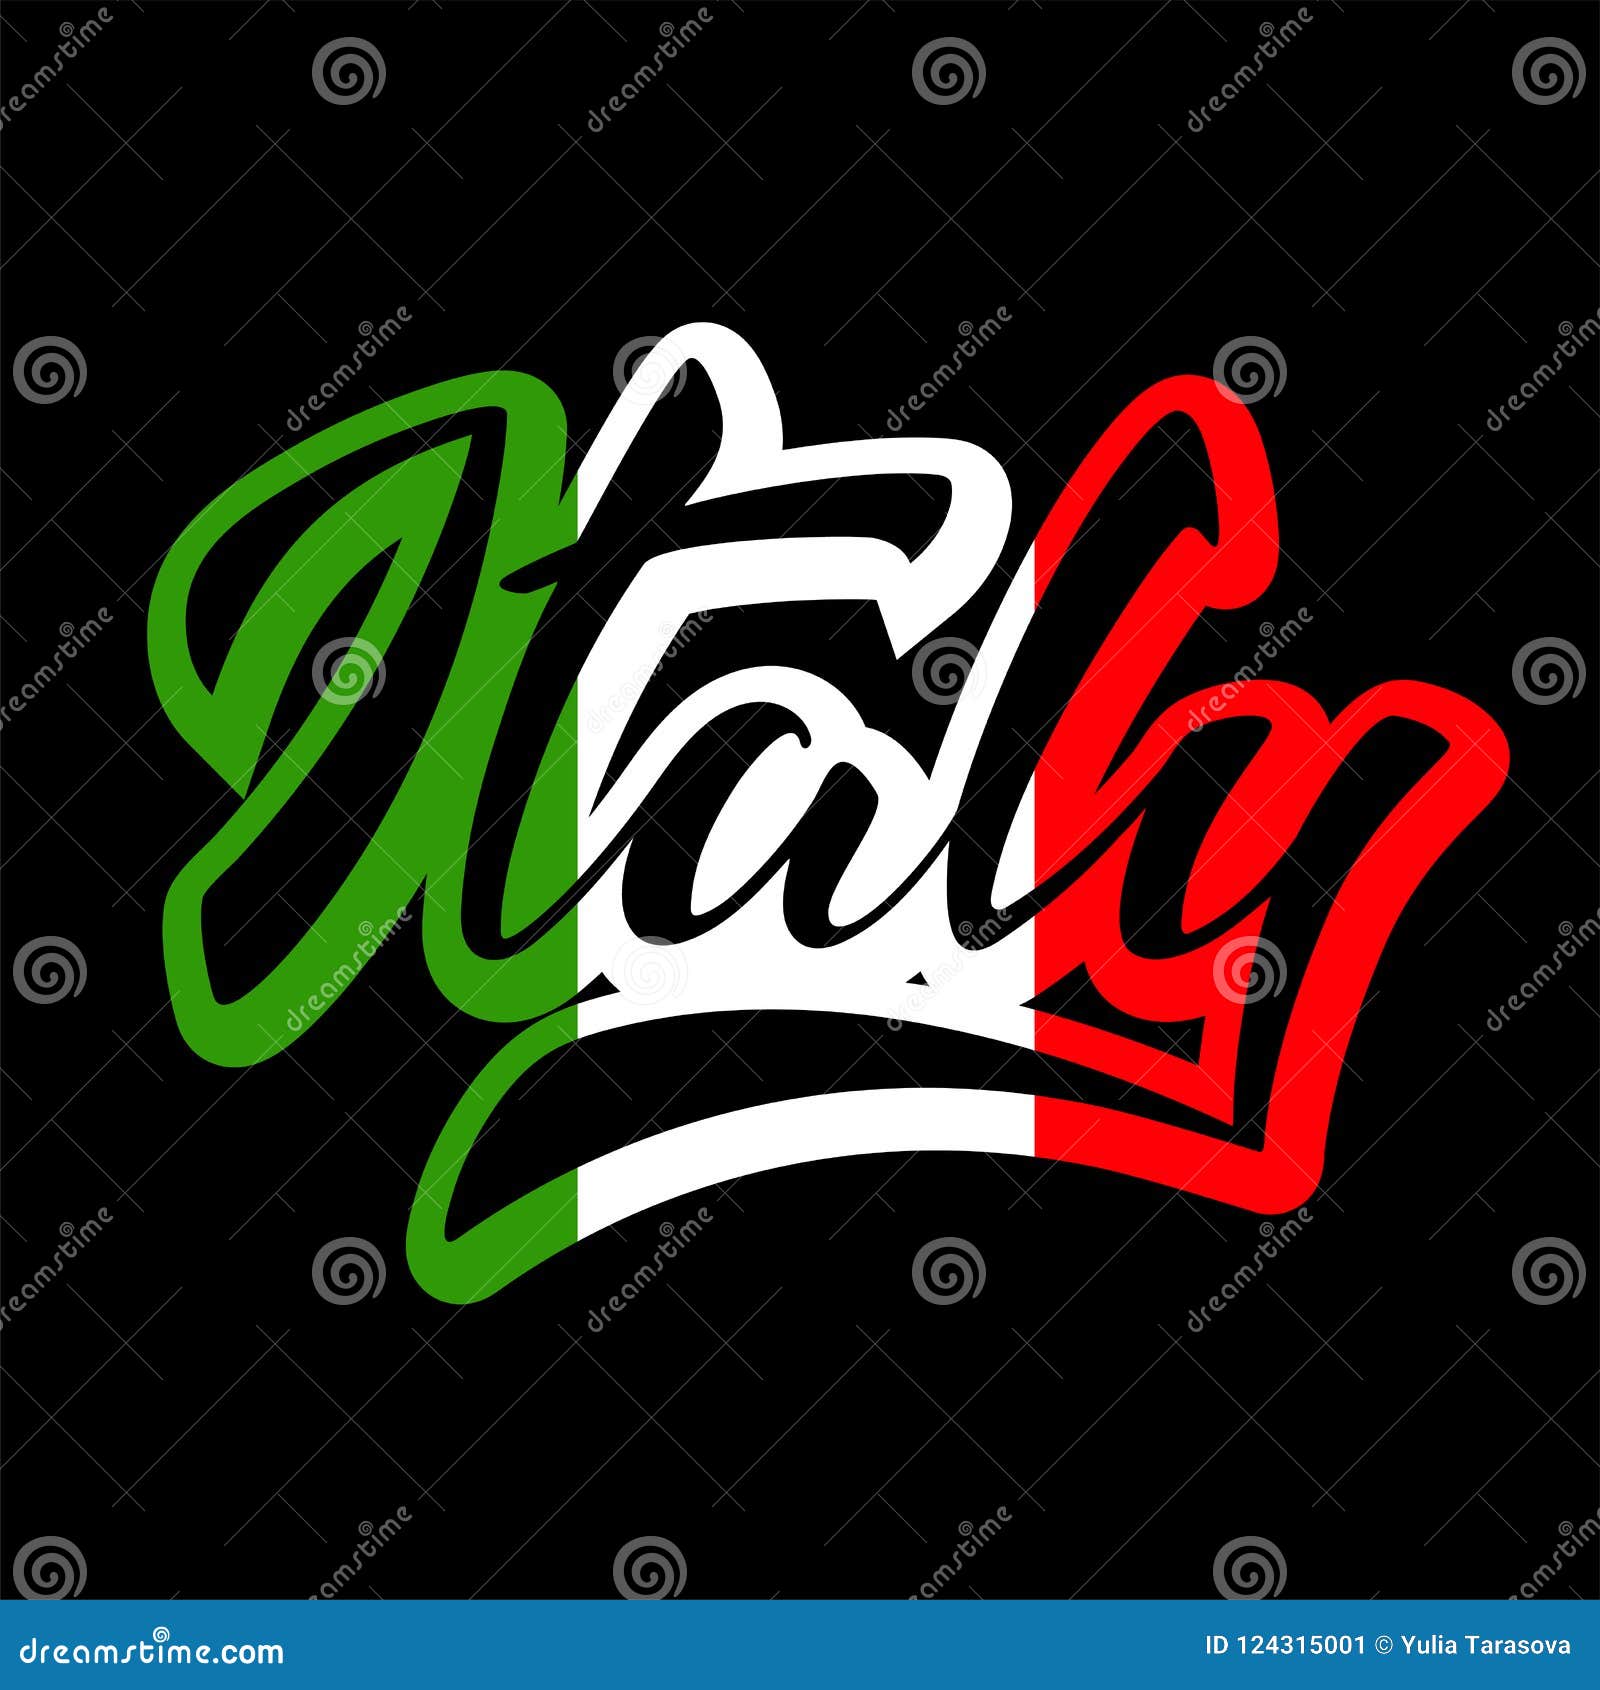 Italy stock vector. Illustration of latin, flag, country - 124315001